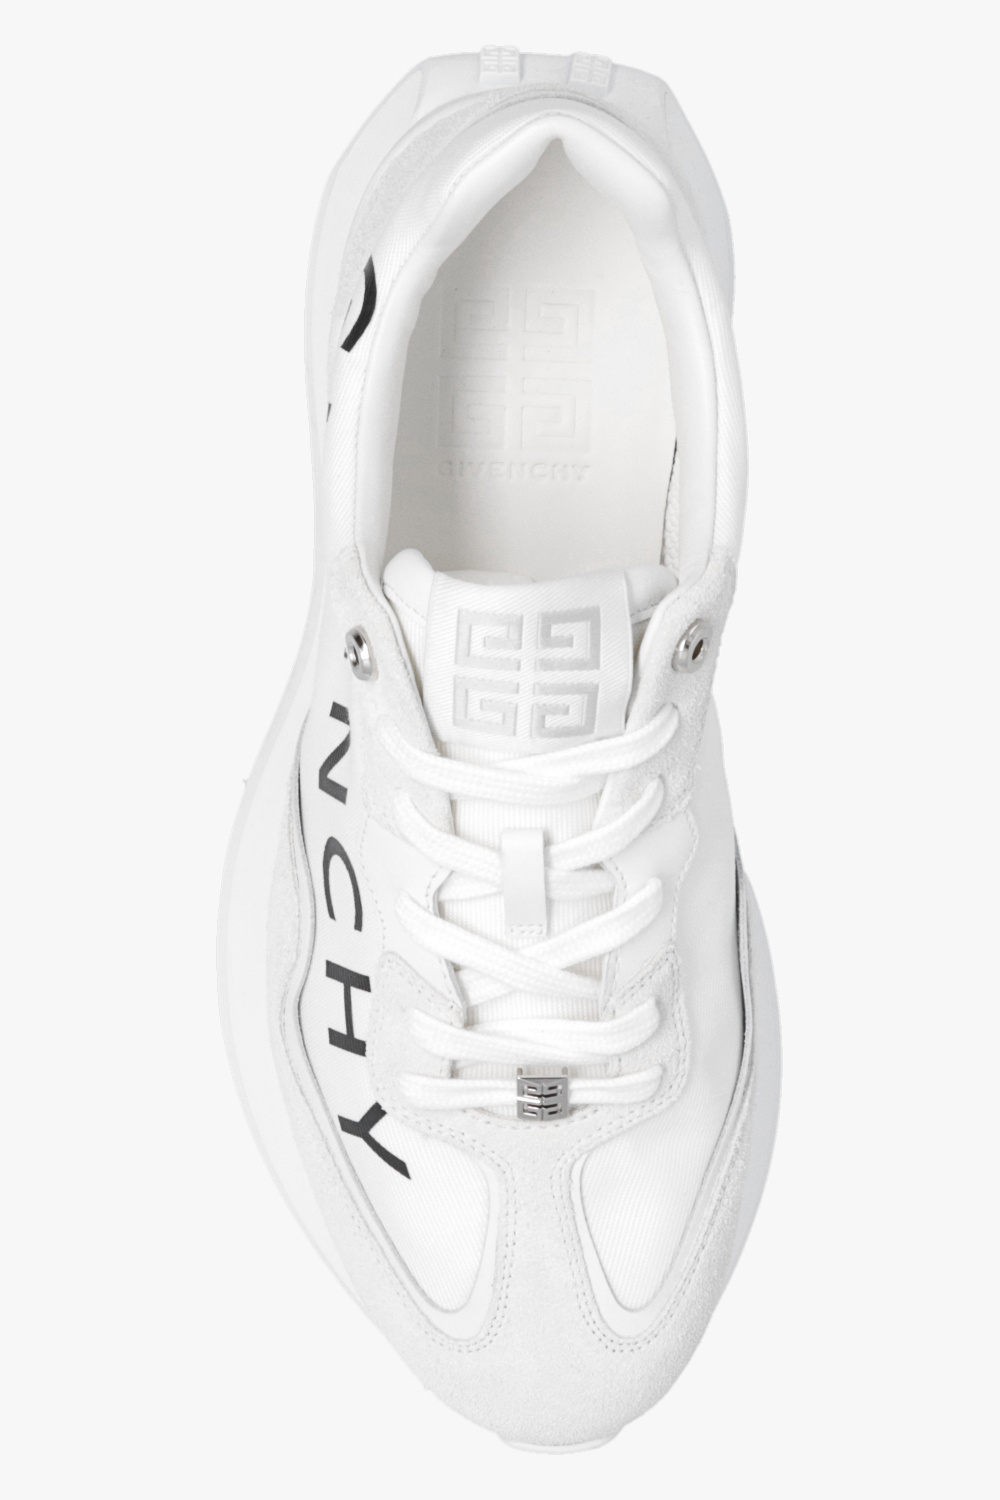 givenchy Love ‘GIV Runner’ sneakers